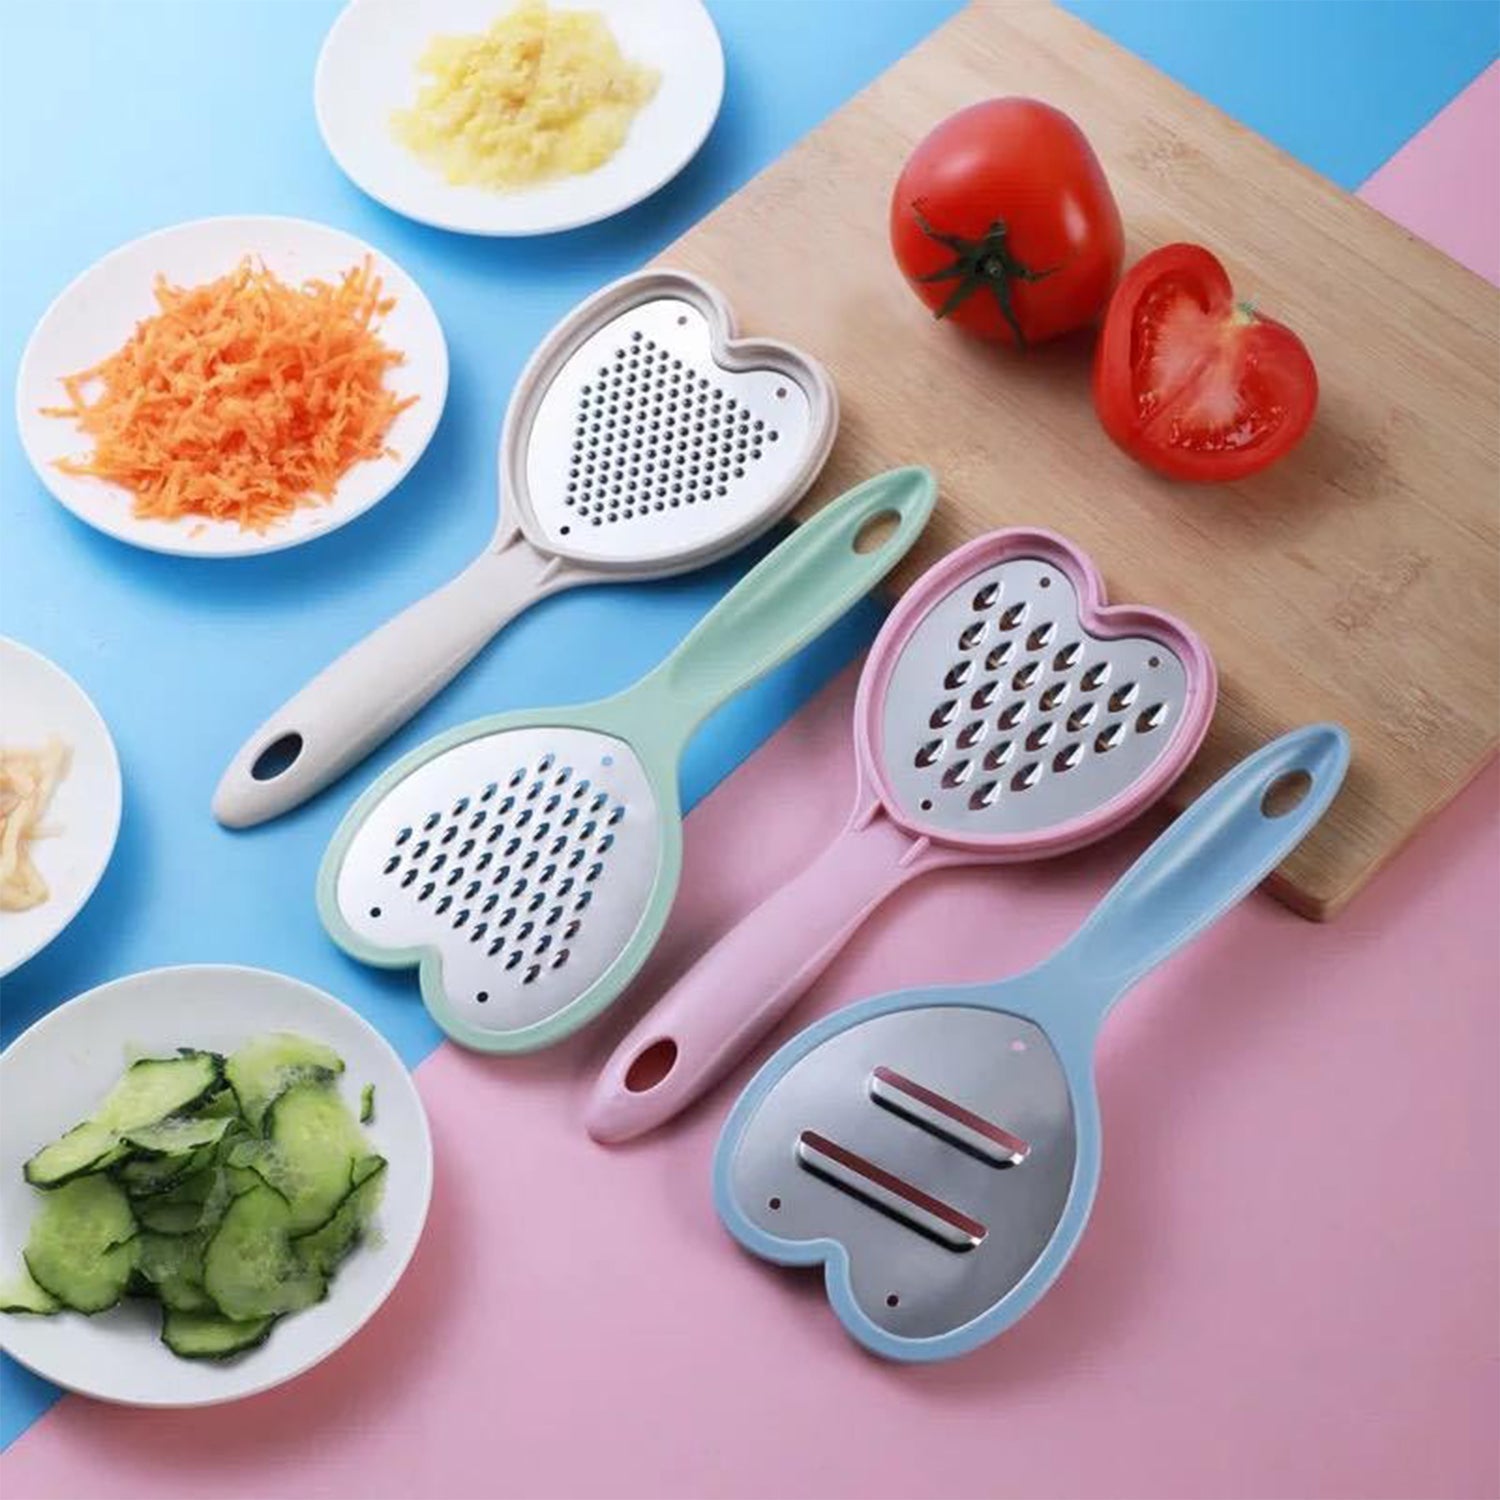 2587a Heart Grater Set and Heart Grater Slicer Used Widely for Grating and Slicing of Fruits, Vegetables, Cheese Etc. Including All Kitchen Purposes. Dukandaily